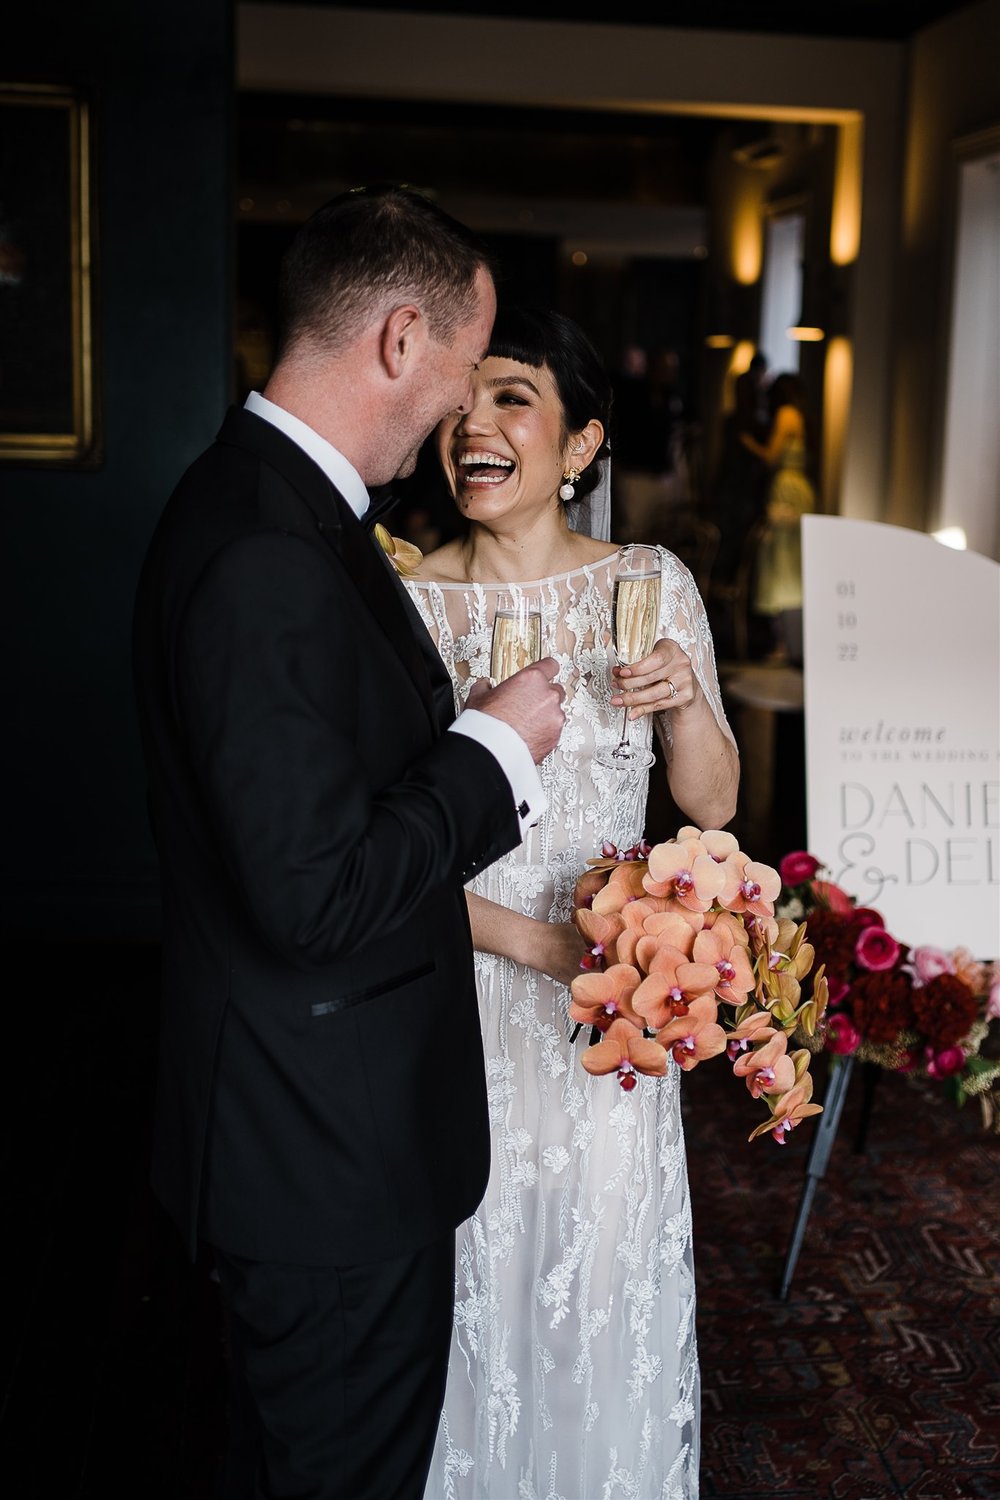  couple smiling in the reception of their wedding in Guildhall Eventspace in Fermantle, Australia 